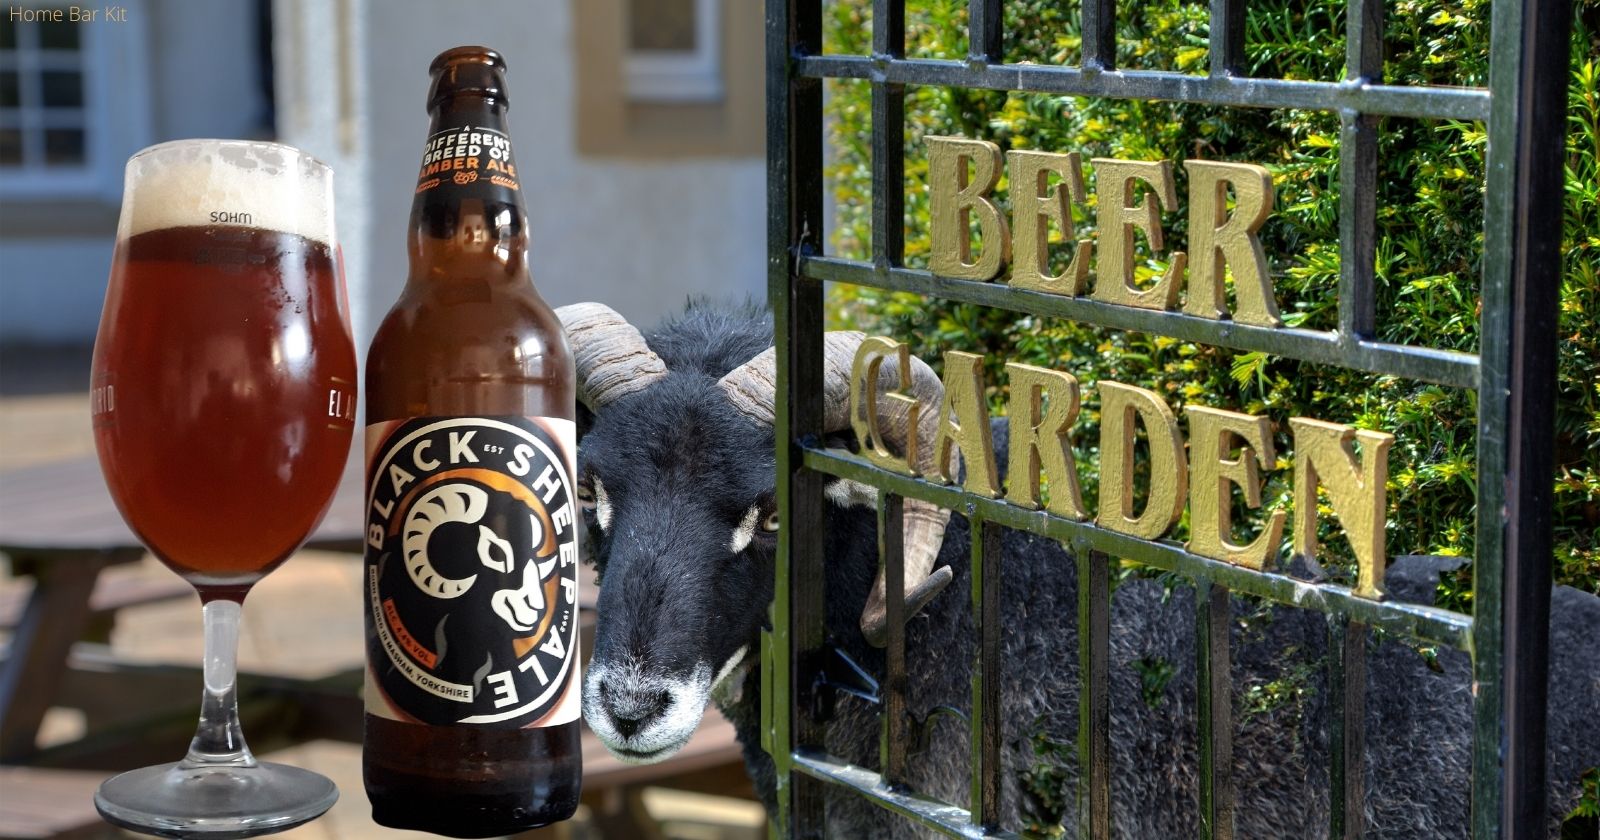 Is Black Sheep Ale Any Good